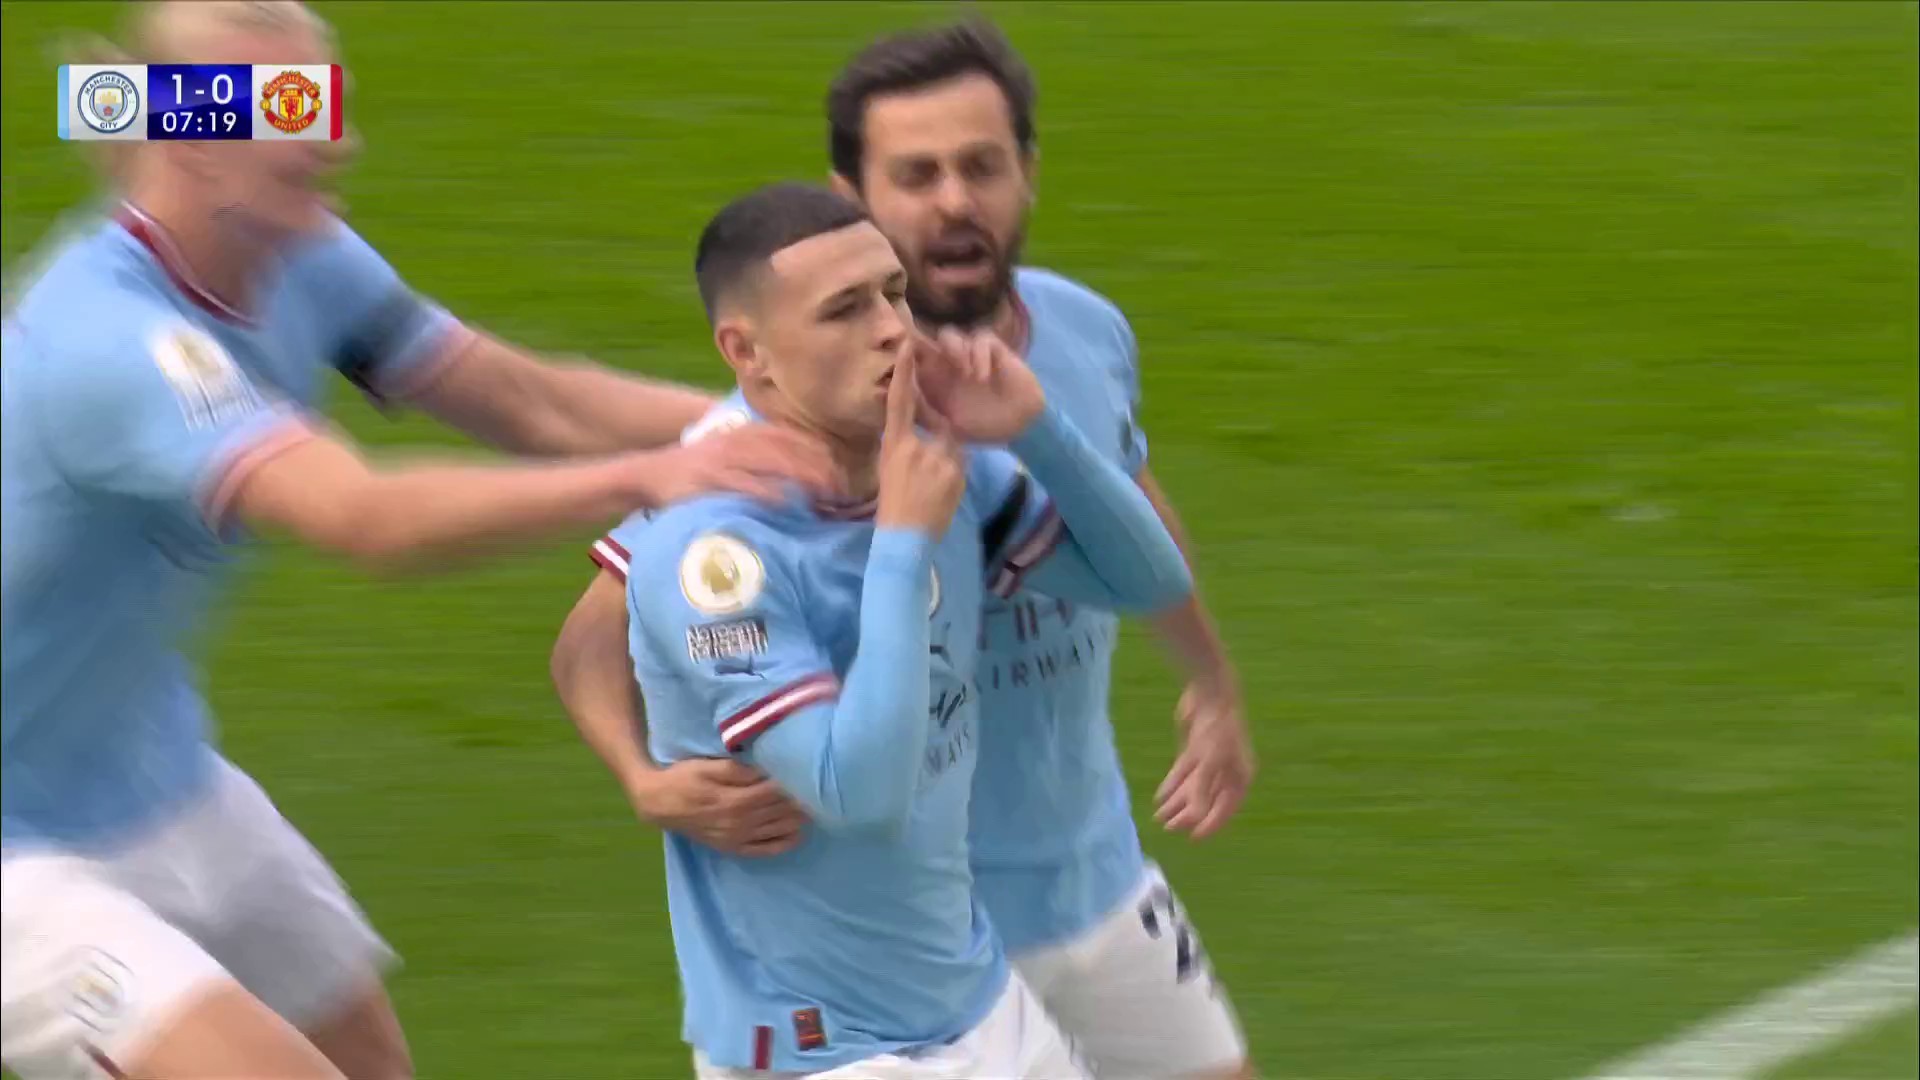 Slick from Phil Foden! 👍 

Manchester City have the early lead! 👕

🎥 via @NBCSportsSoccer 

”